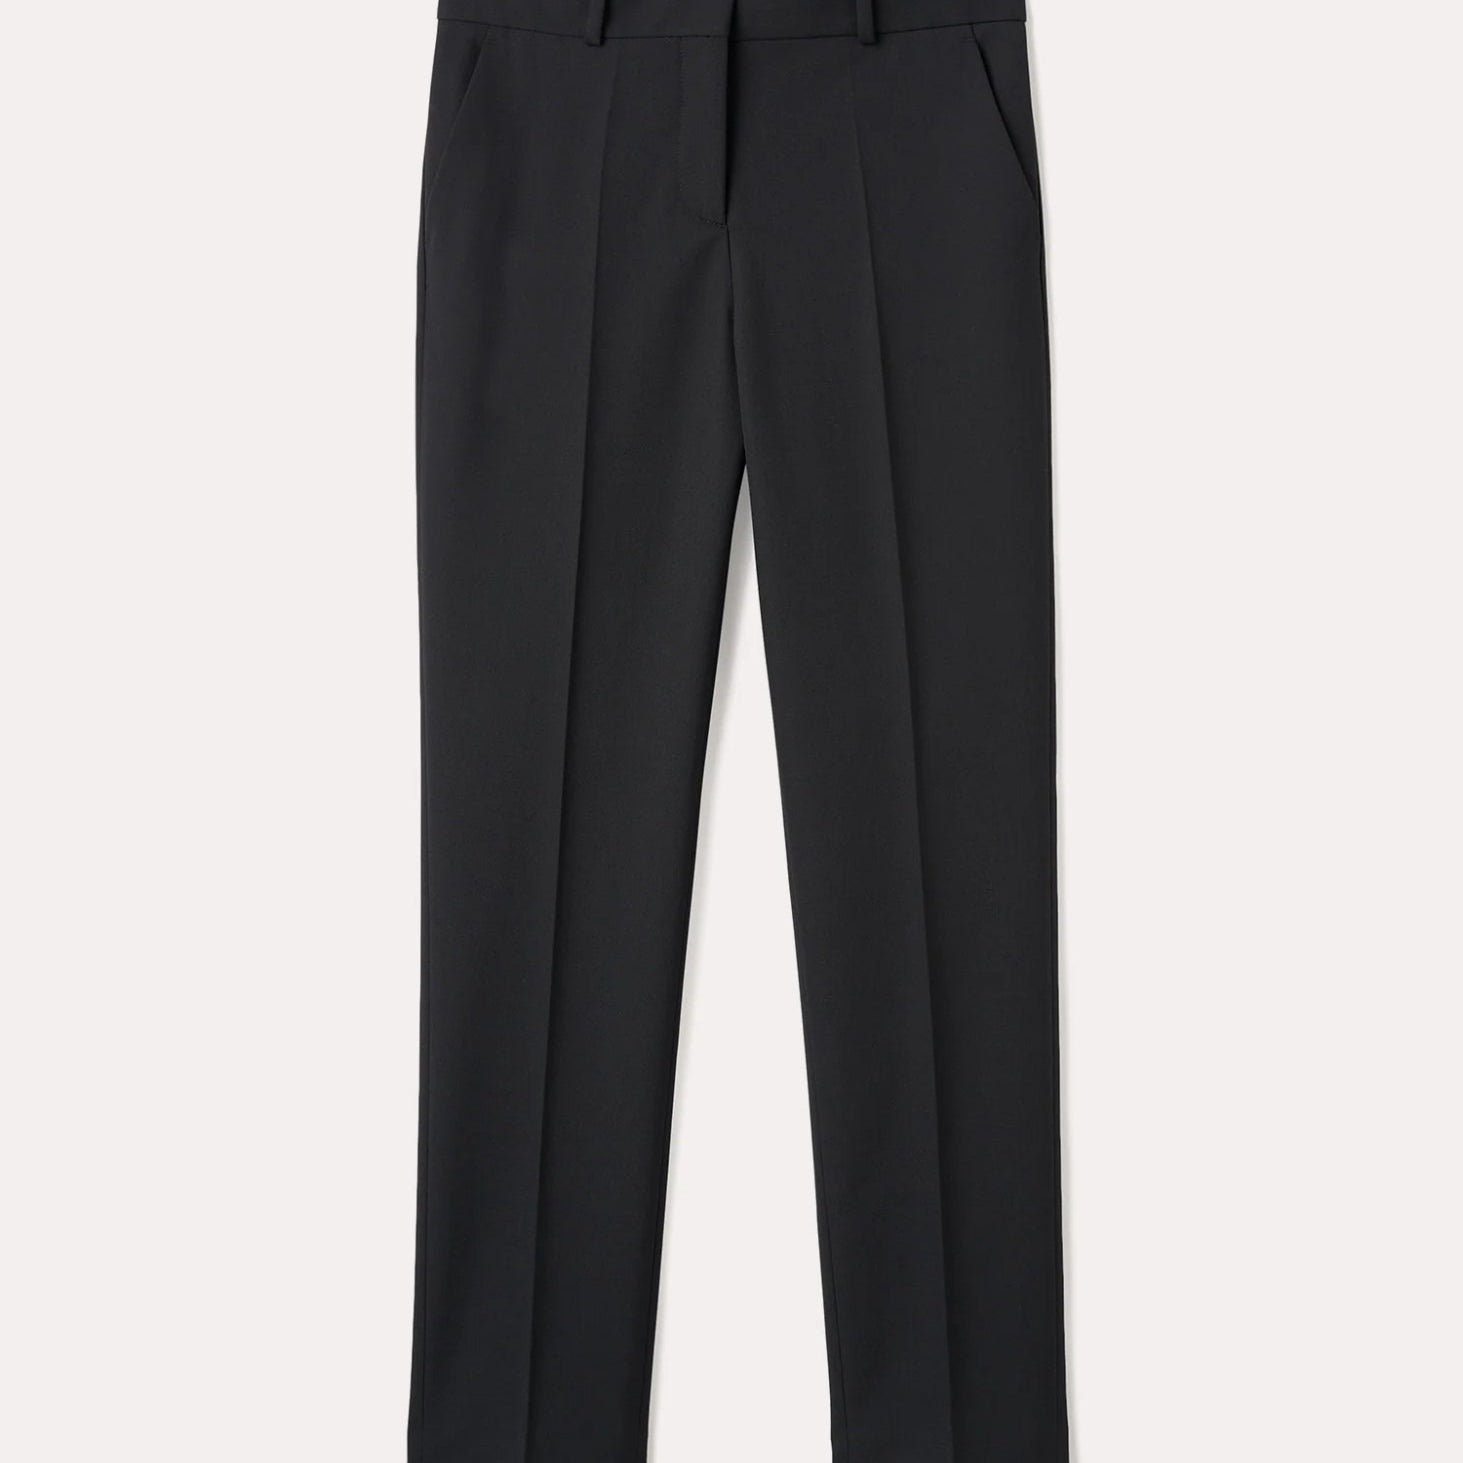 Mid-waist Slim Trousers Black by Toteme - The Line